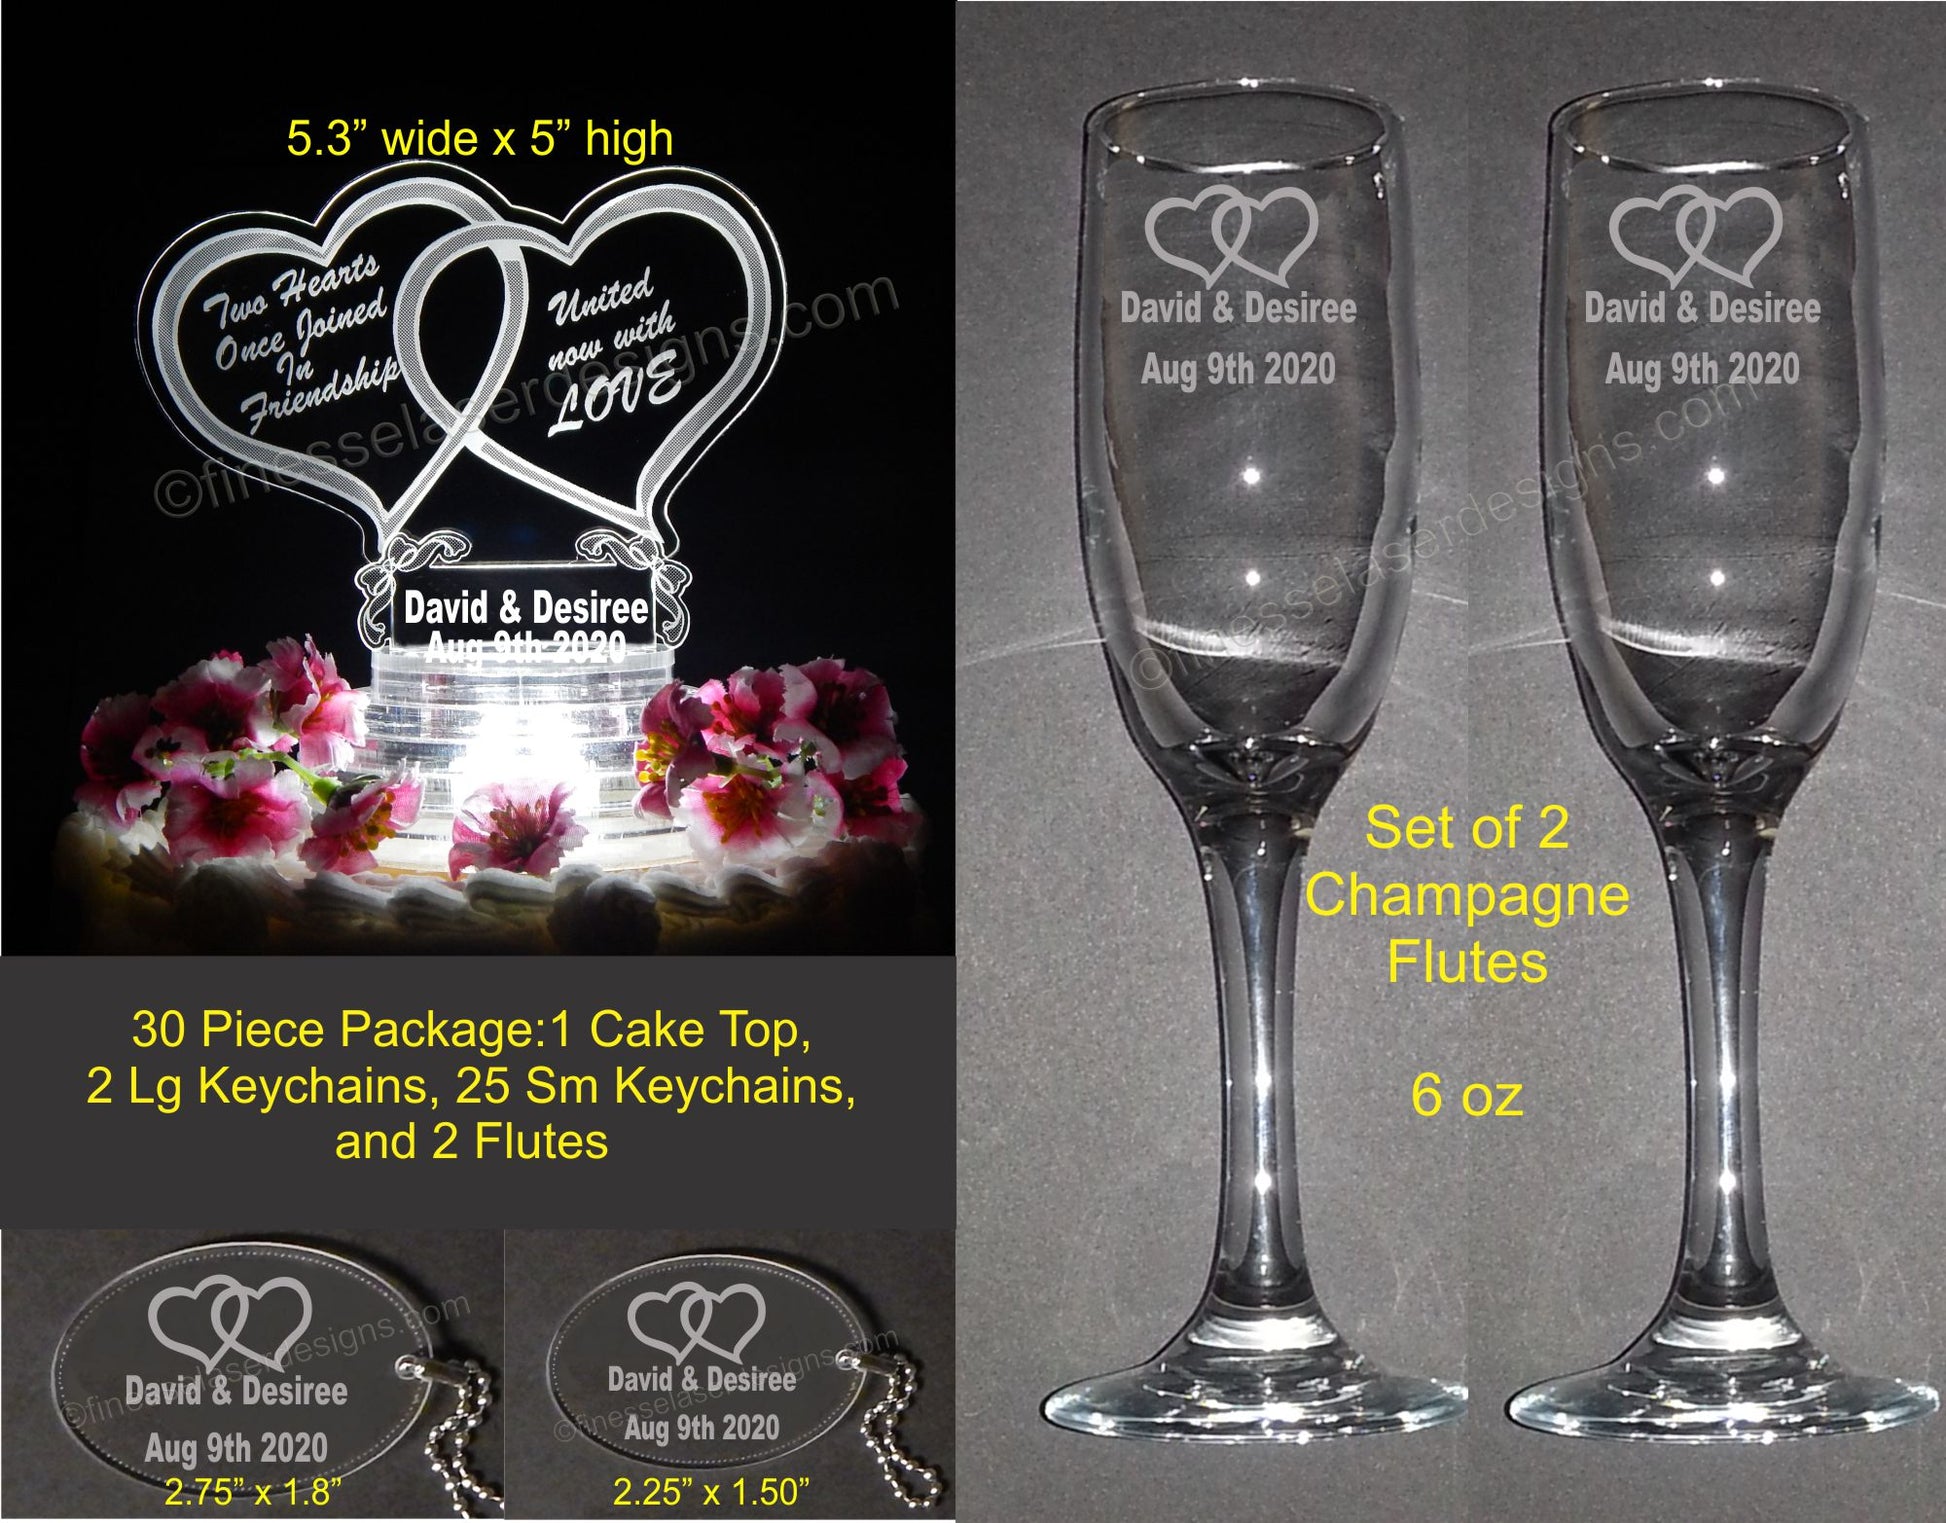 wedding package showing an acrylic heart shaped cake topper, large and small keychain favors, and set of two champagne flutes with dimensions and information